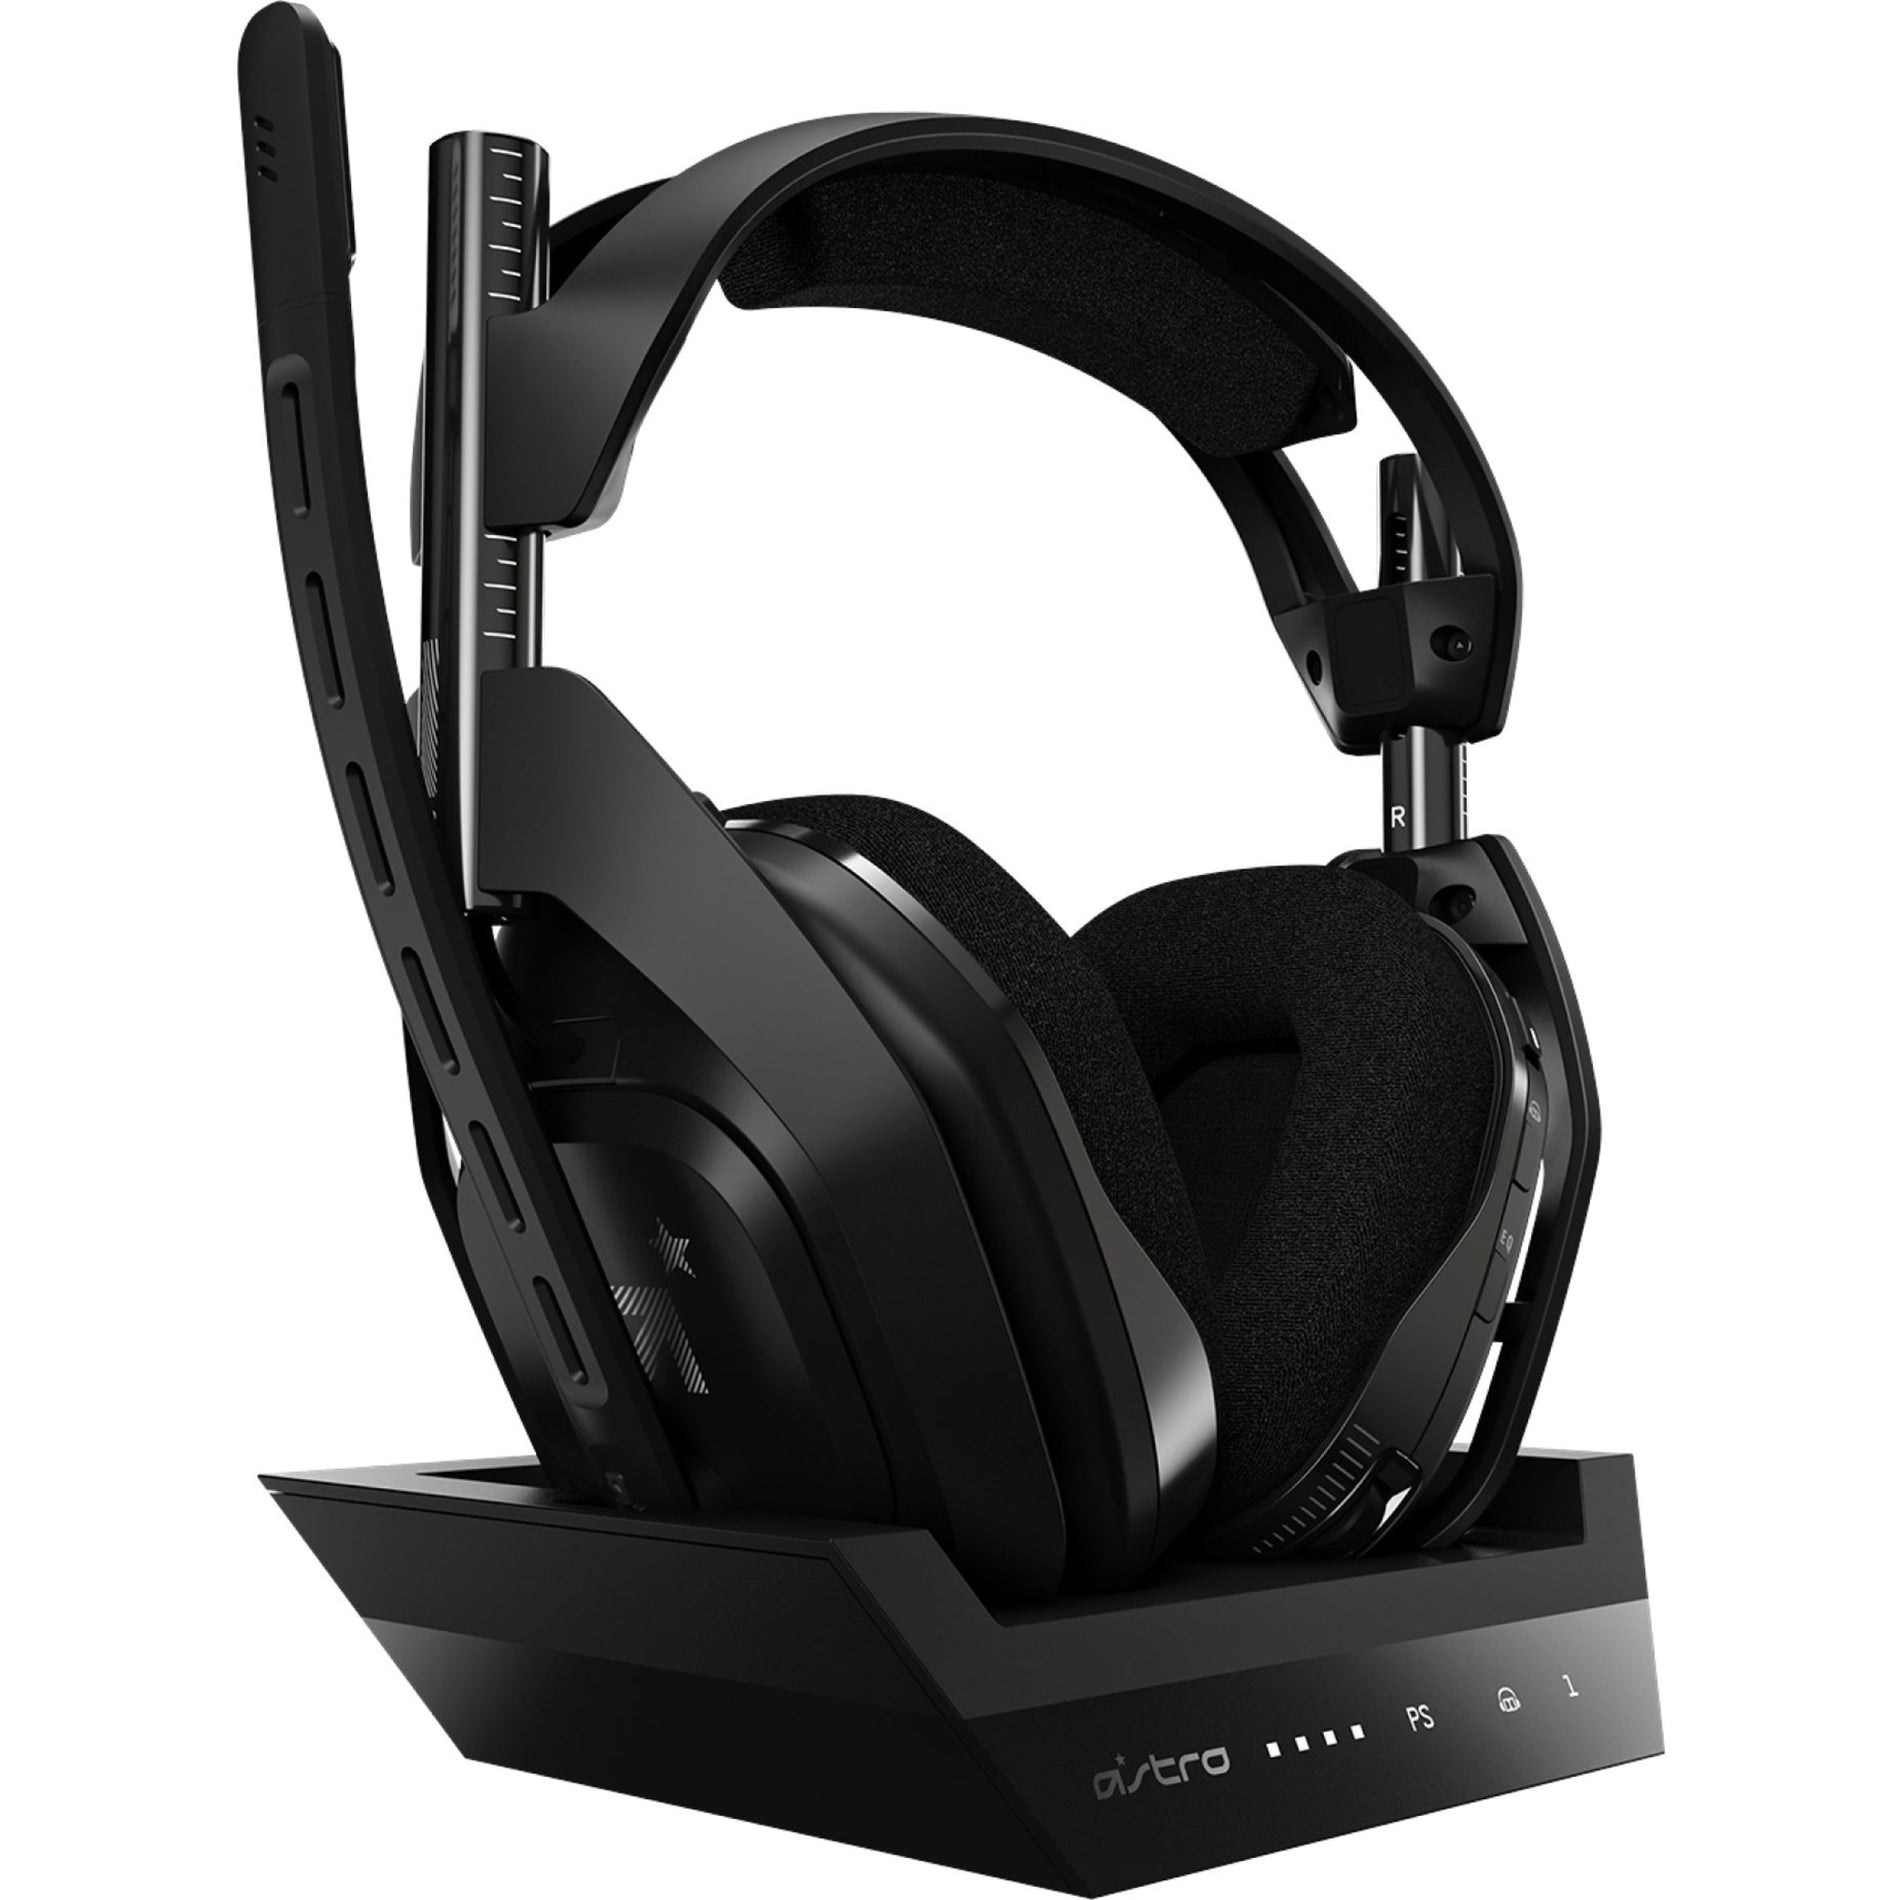 Astro A50 Wireless Headset with Lithium-Ion Battery (939-001673)